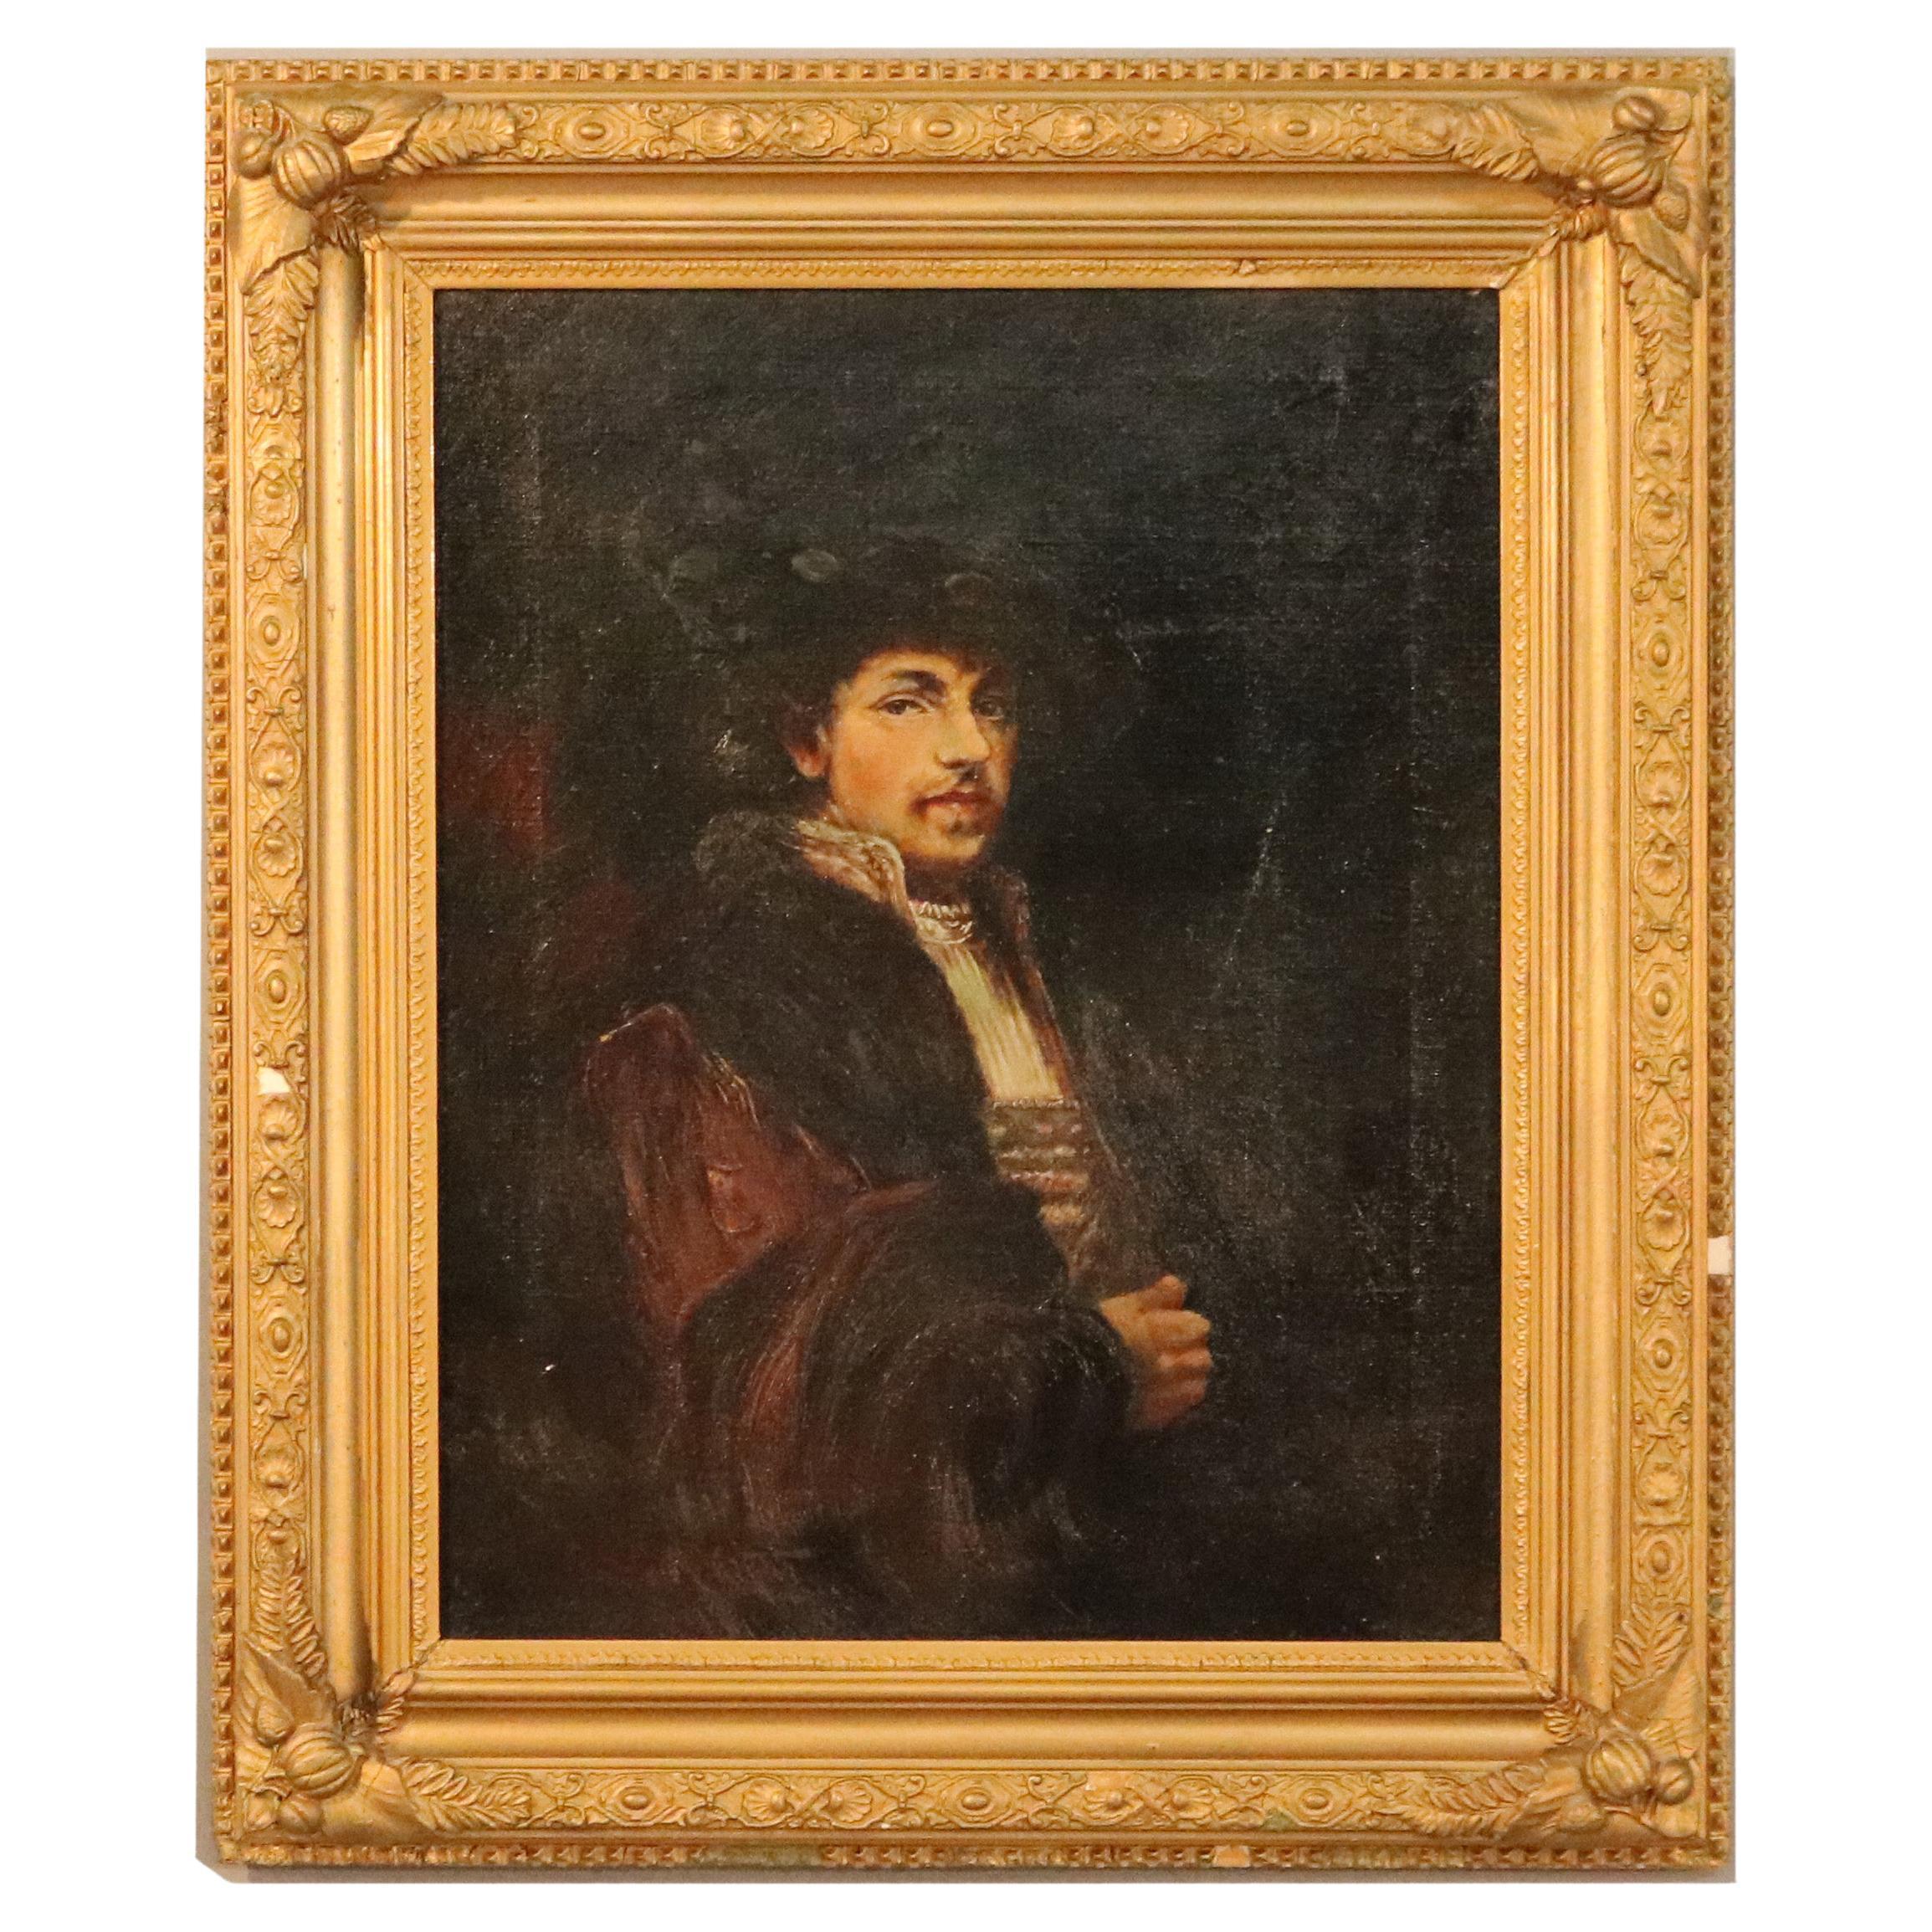 Antique Old Master Copy Oil Painting, Portrait of a Spaniard, Late 19th C